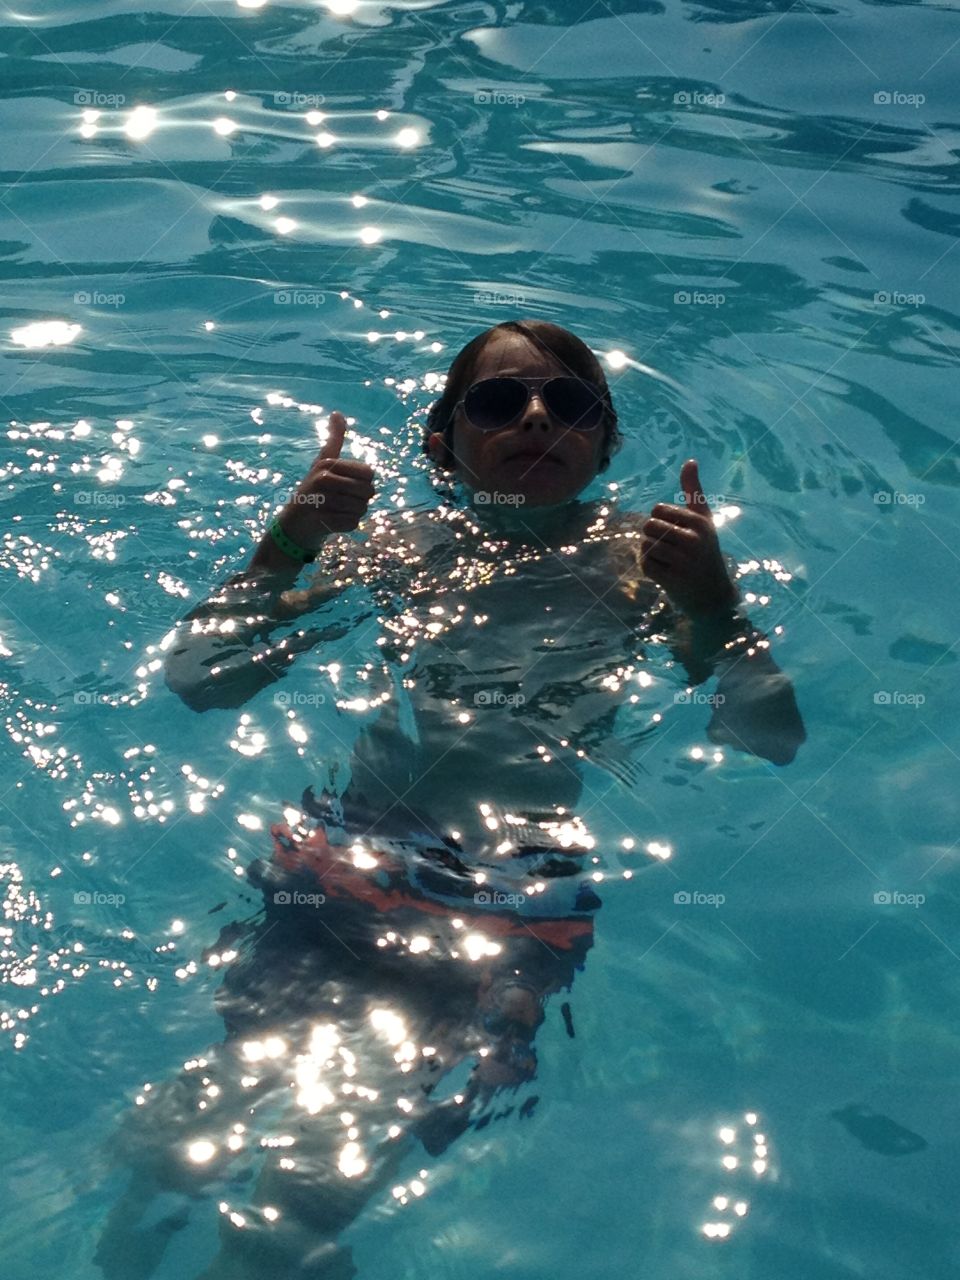 Chilling in the pool. A scorching hot day in sunny Cyprus. Sun on the water. Thumbs up! 